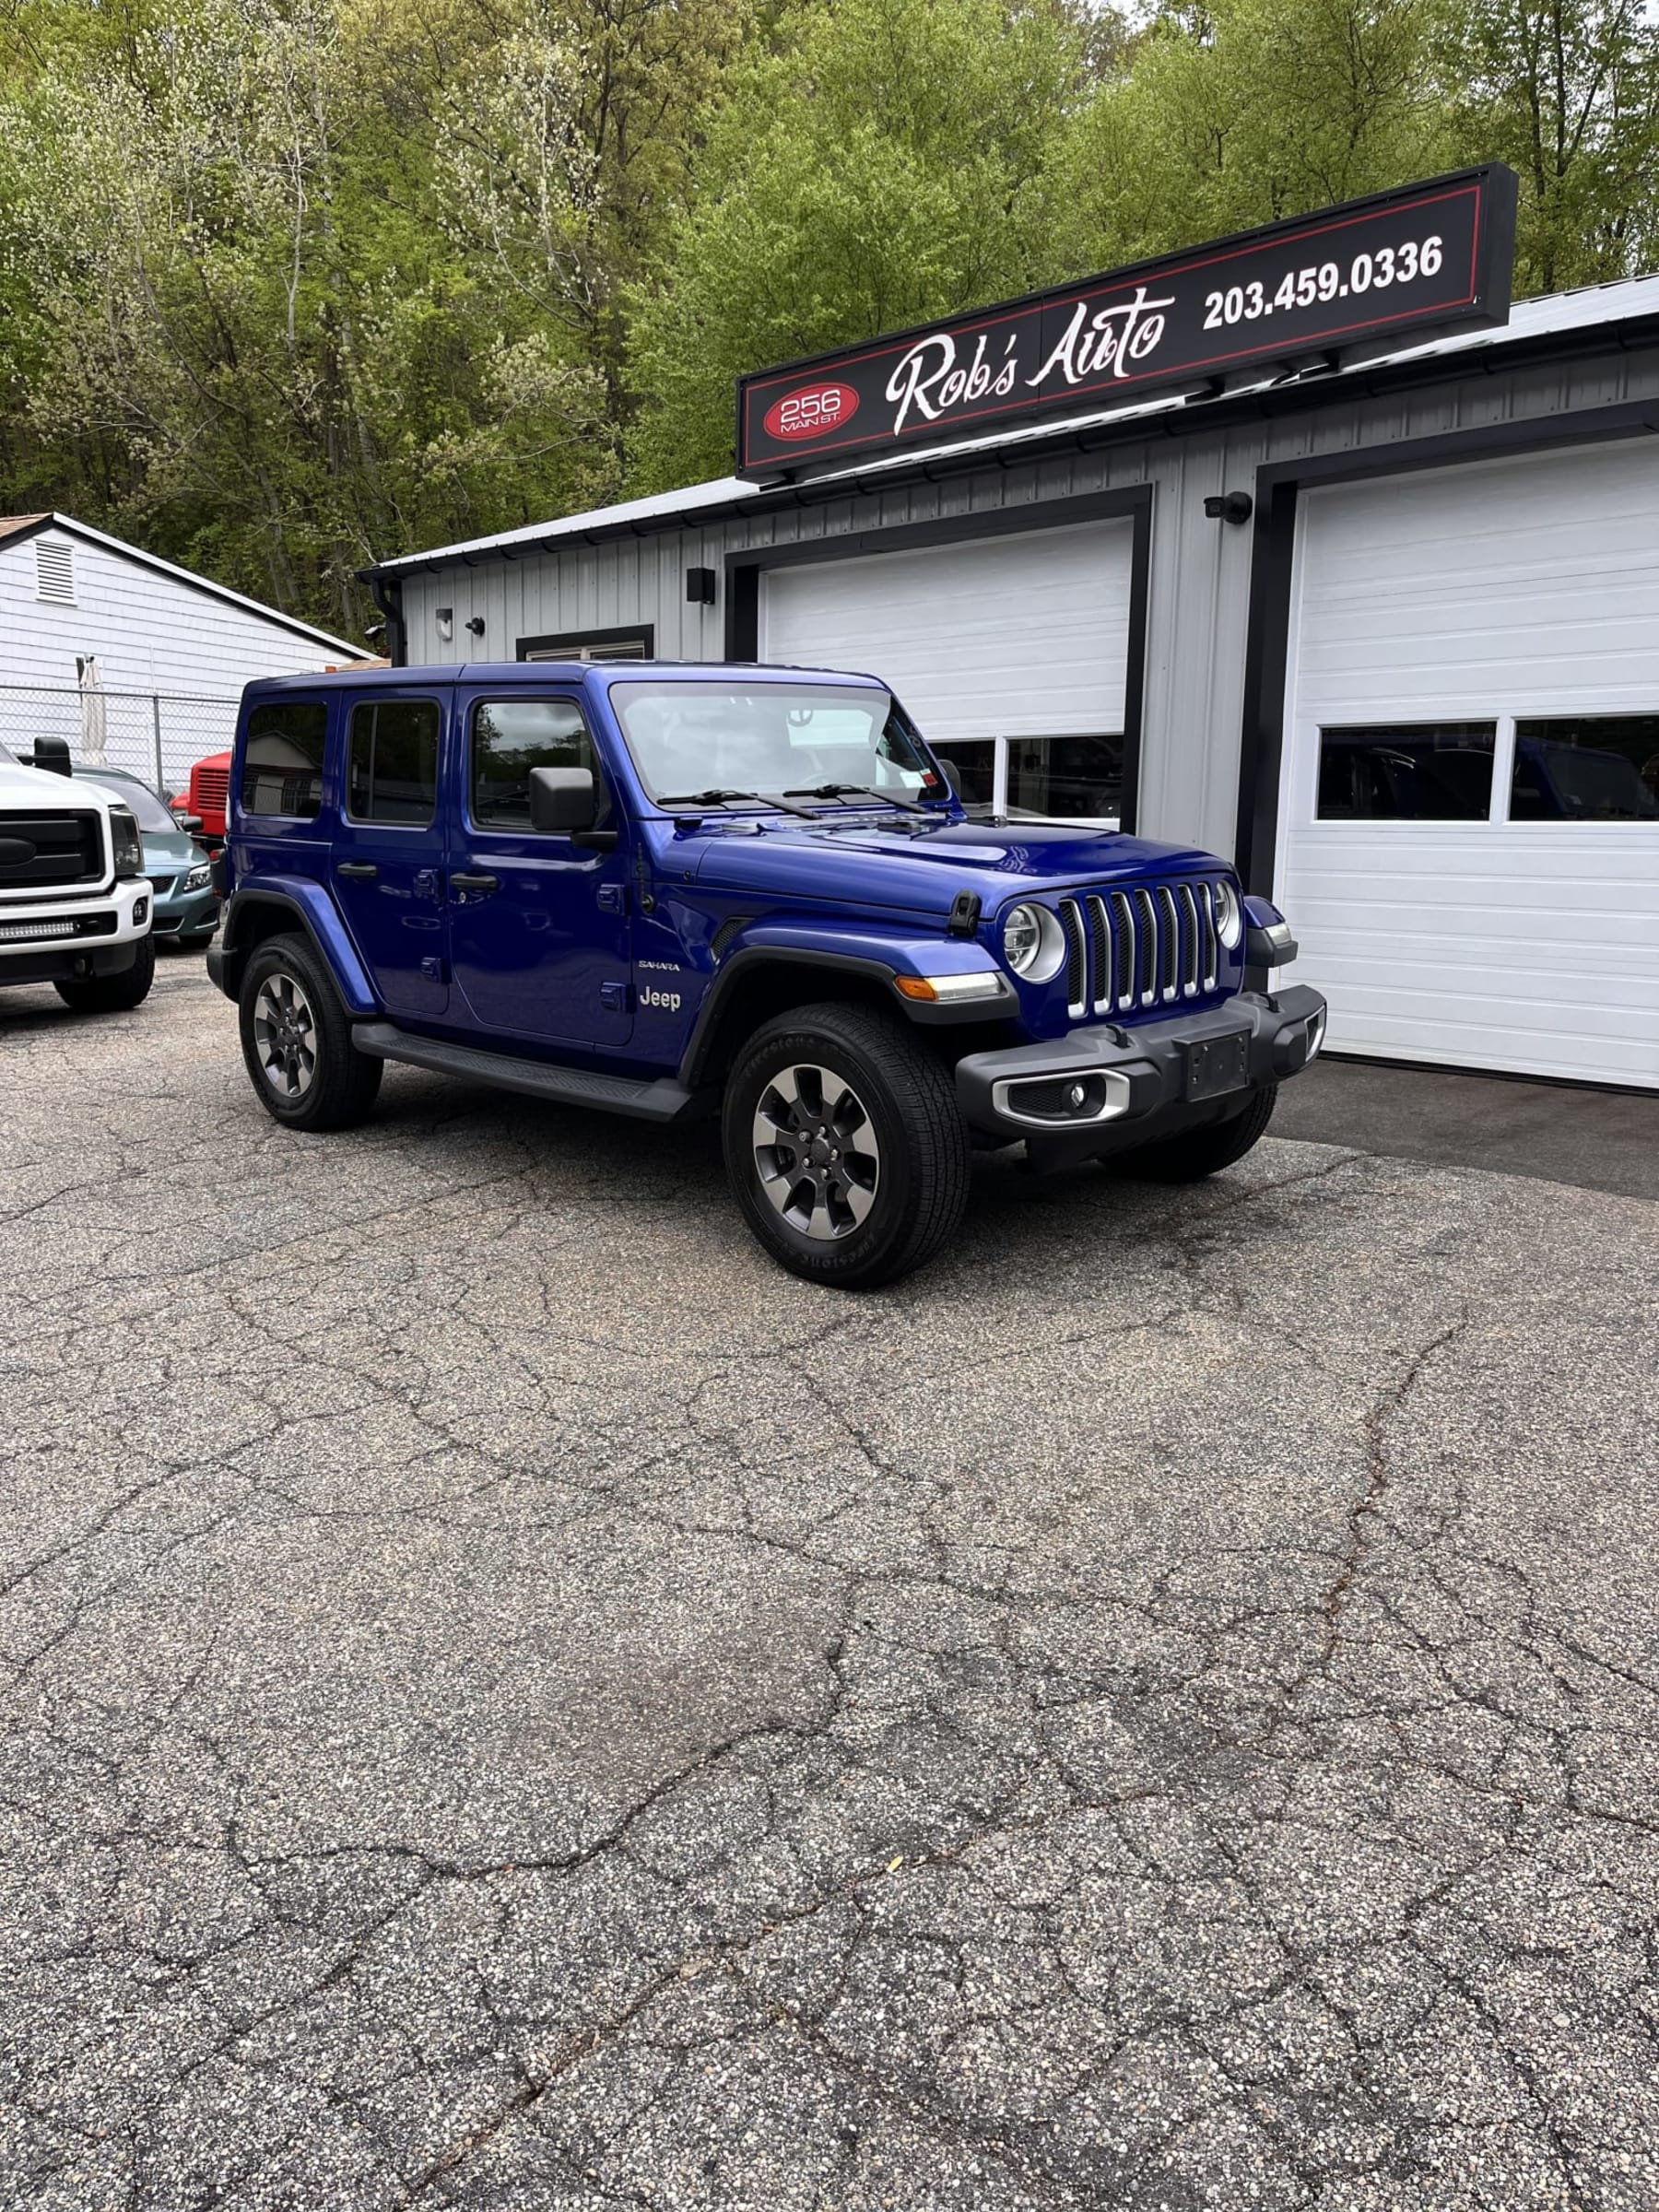 NEW ARRIVAL!! 2018 Jeep Unlimited Sahara!! Clean carfax! 78,700 miles! With an original window sticker of $52,300 this Jeep is LOADED! Heated Leather Seats, Heated Steering Wheel, Navigation, Backup Camera, Remote Start, Keyless Entry, Body Color Freedom Hardtop, Soft Top, Jeep Active Safety Group, LED Lighting Group, Alpine Premium Audio System and more!! It’s a steal at only $28,900!!